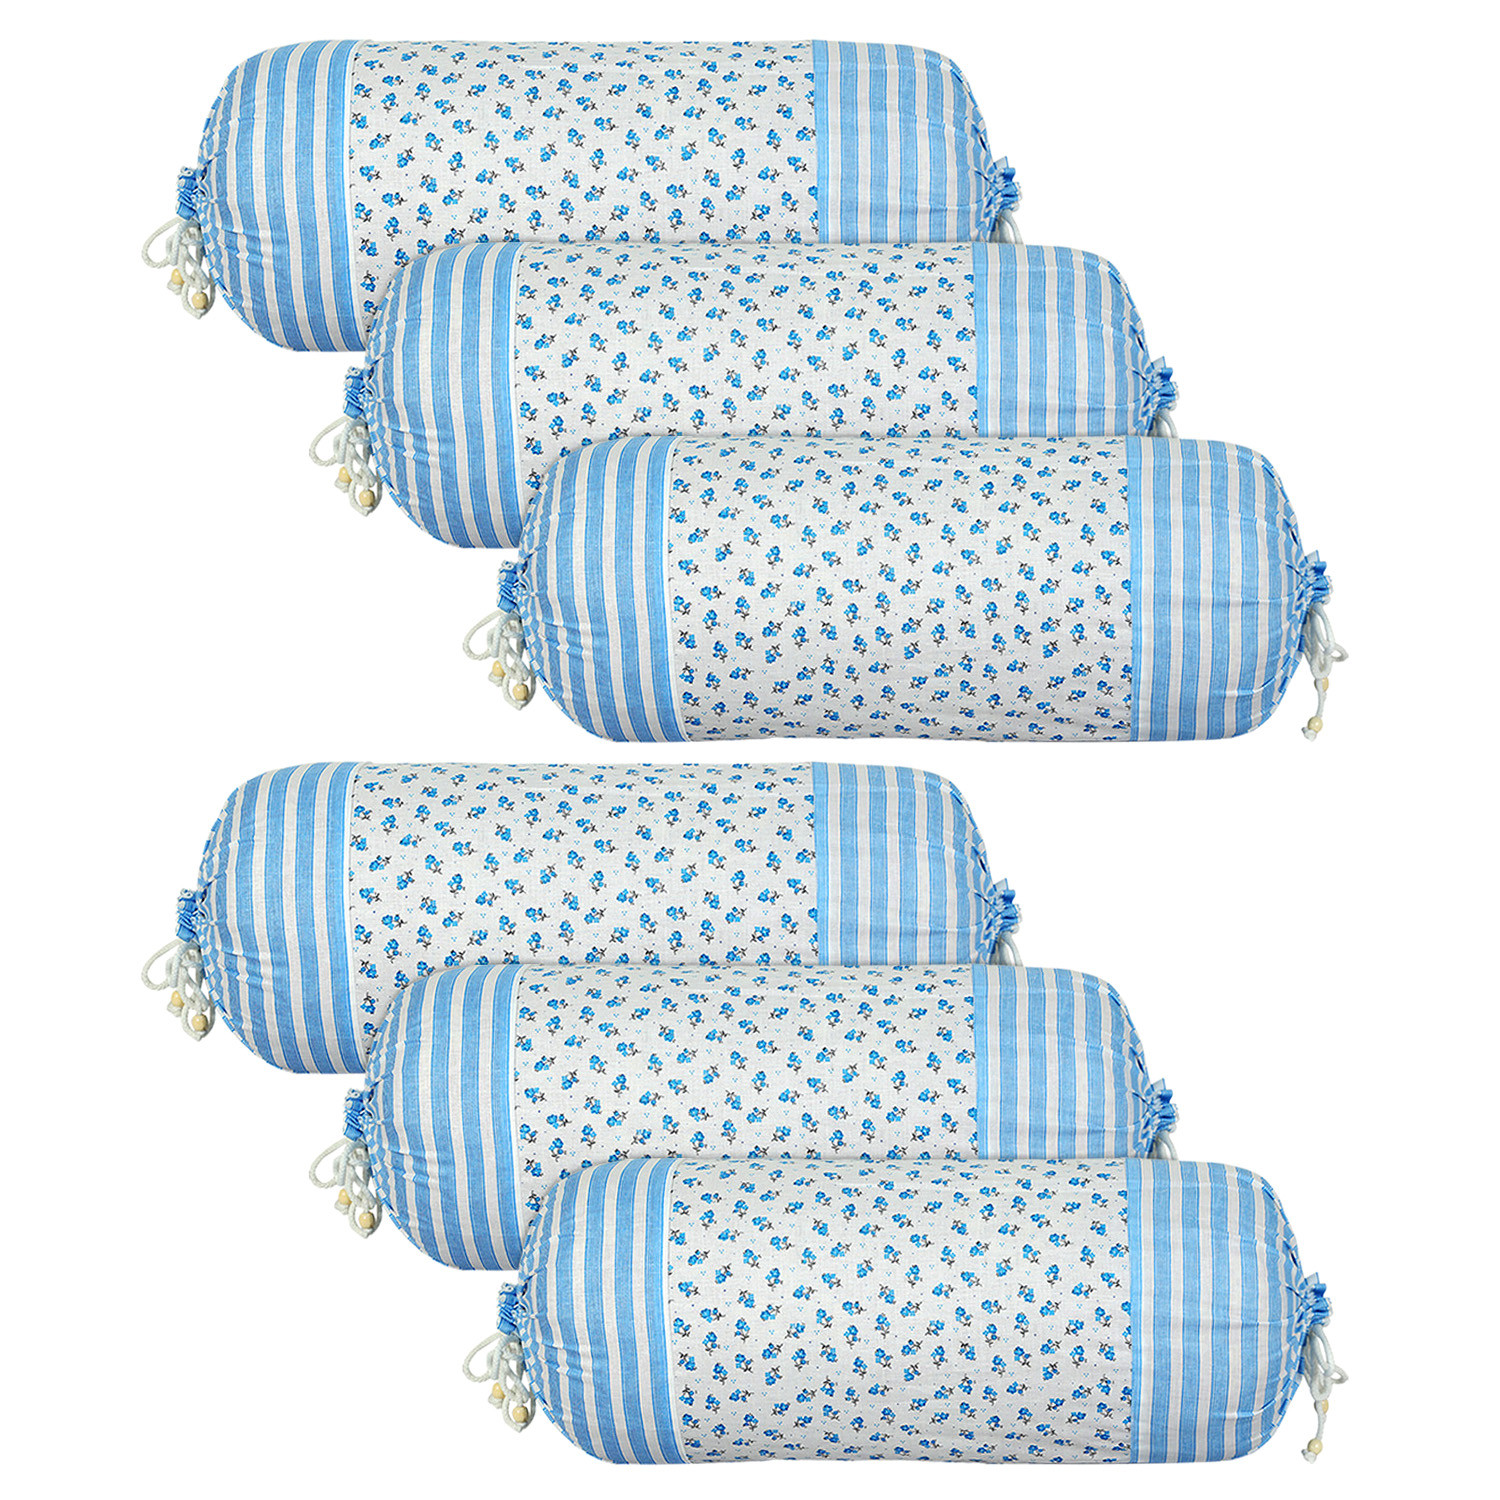 Kuber Industries Bolster Covers | Cotton Bolster Cover Set | Diwan Bolster Cover Set | Bolster Pillow Cover | Blue Flower Masand Cover | 16x32 Inch |White